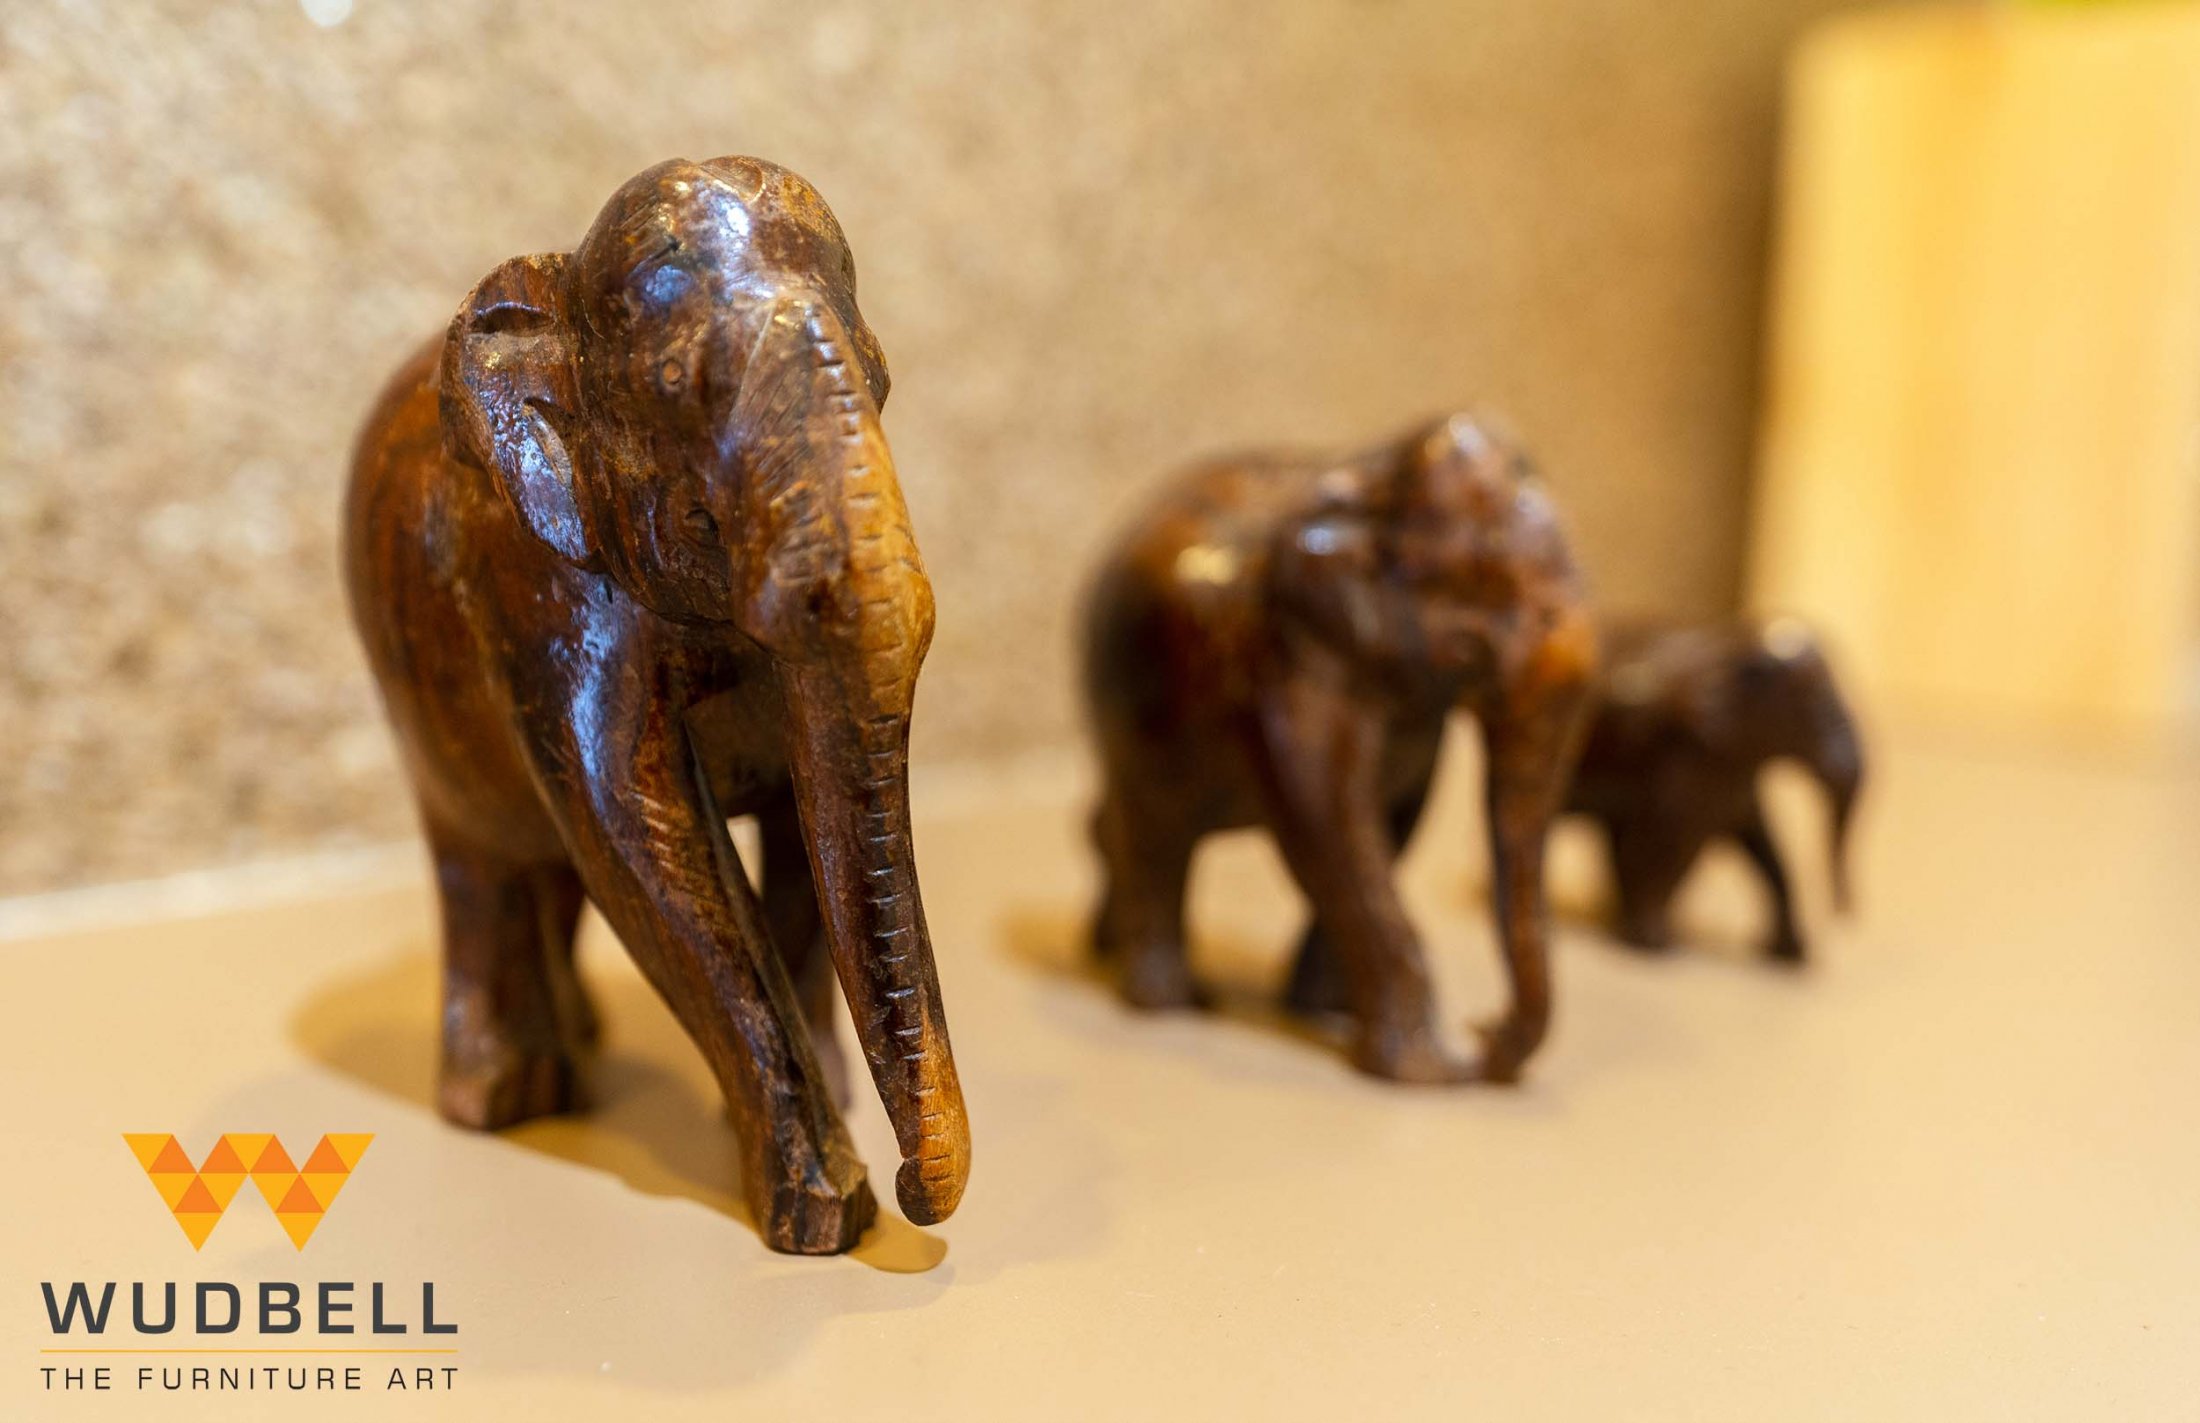 Wooden carved elephant sculptures amplifying the artistic touch